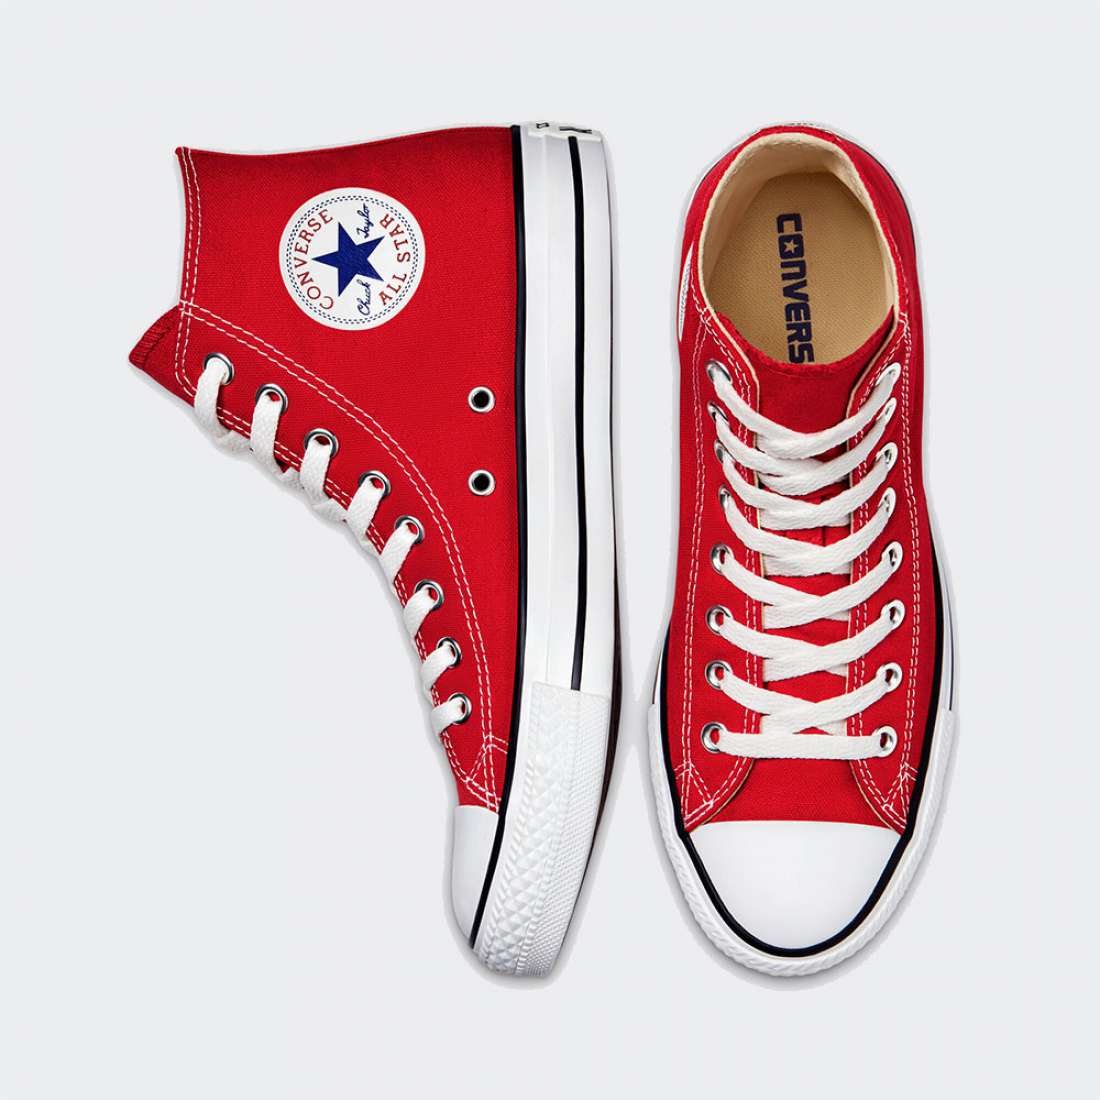 CONVERSE CHUCK TAYLOR ALL STAR HIGH TOP RED